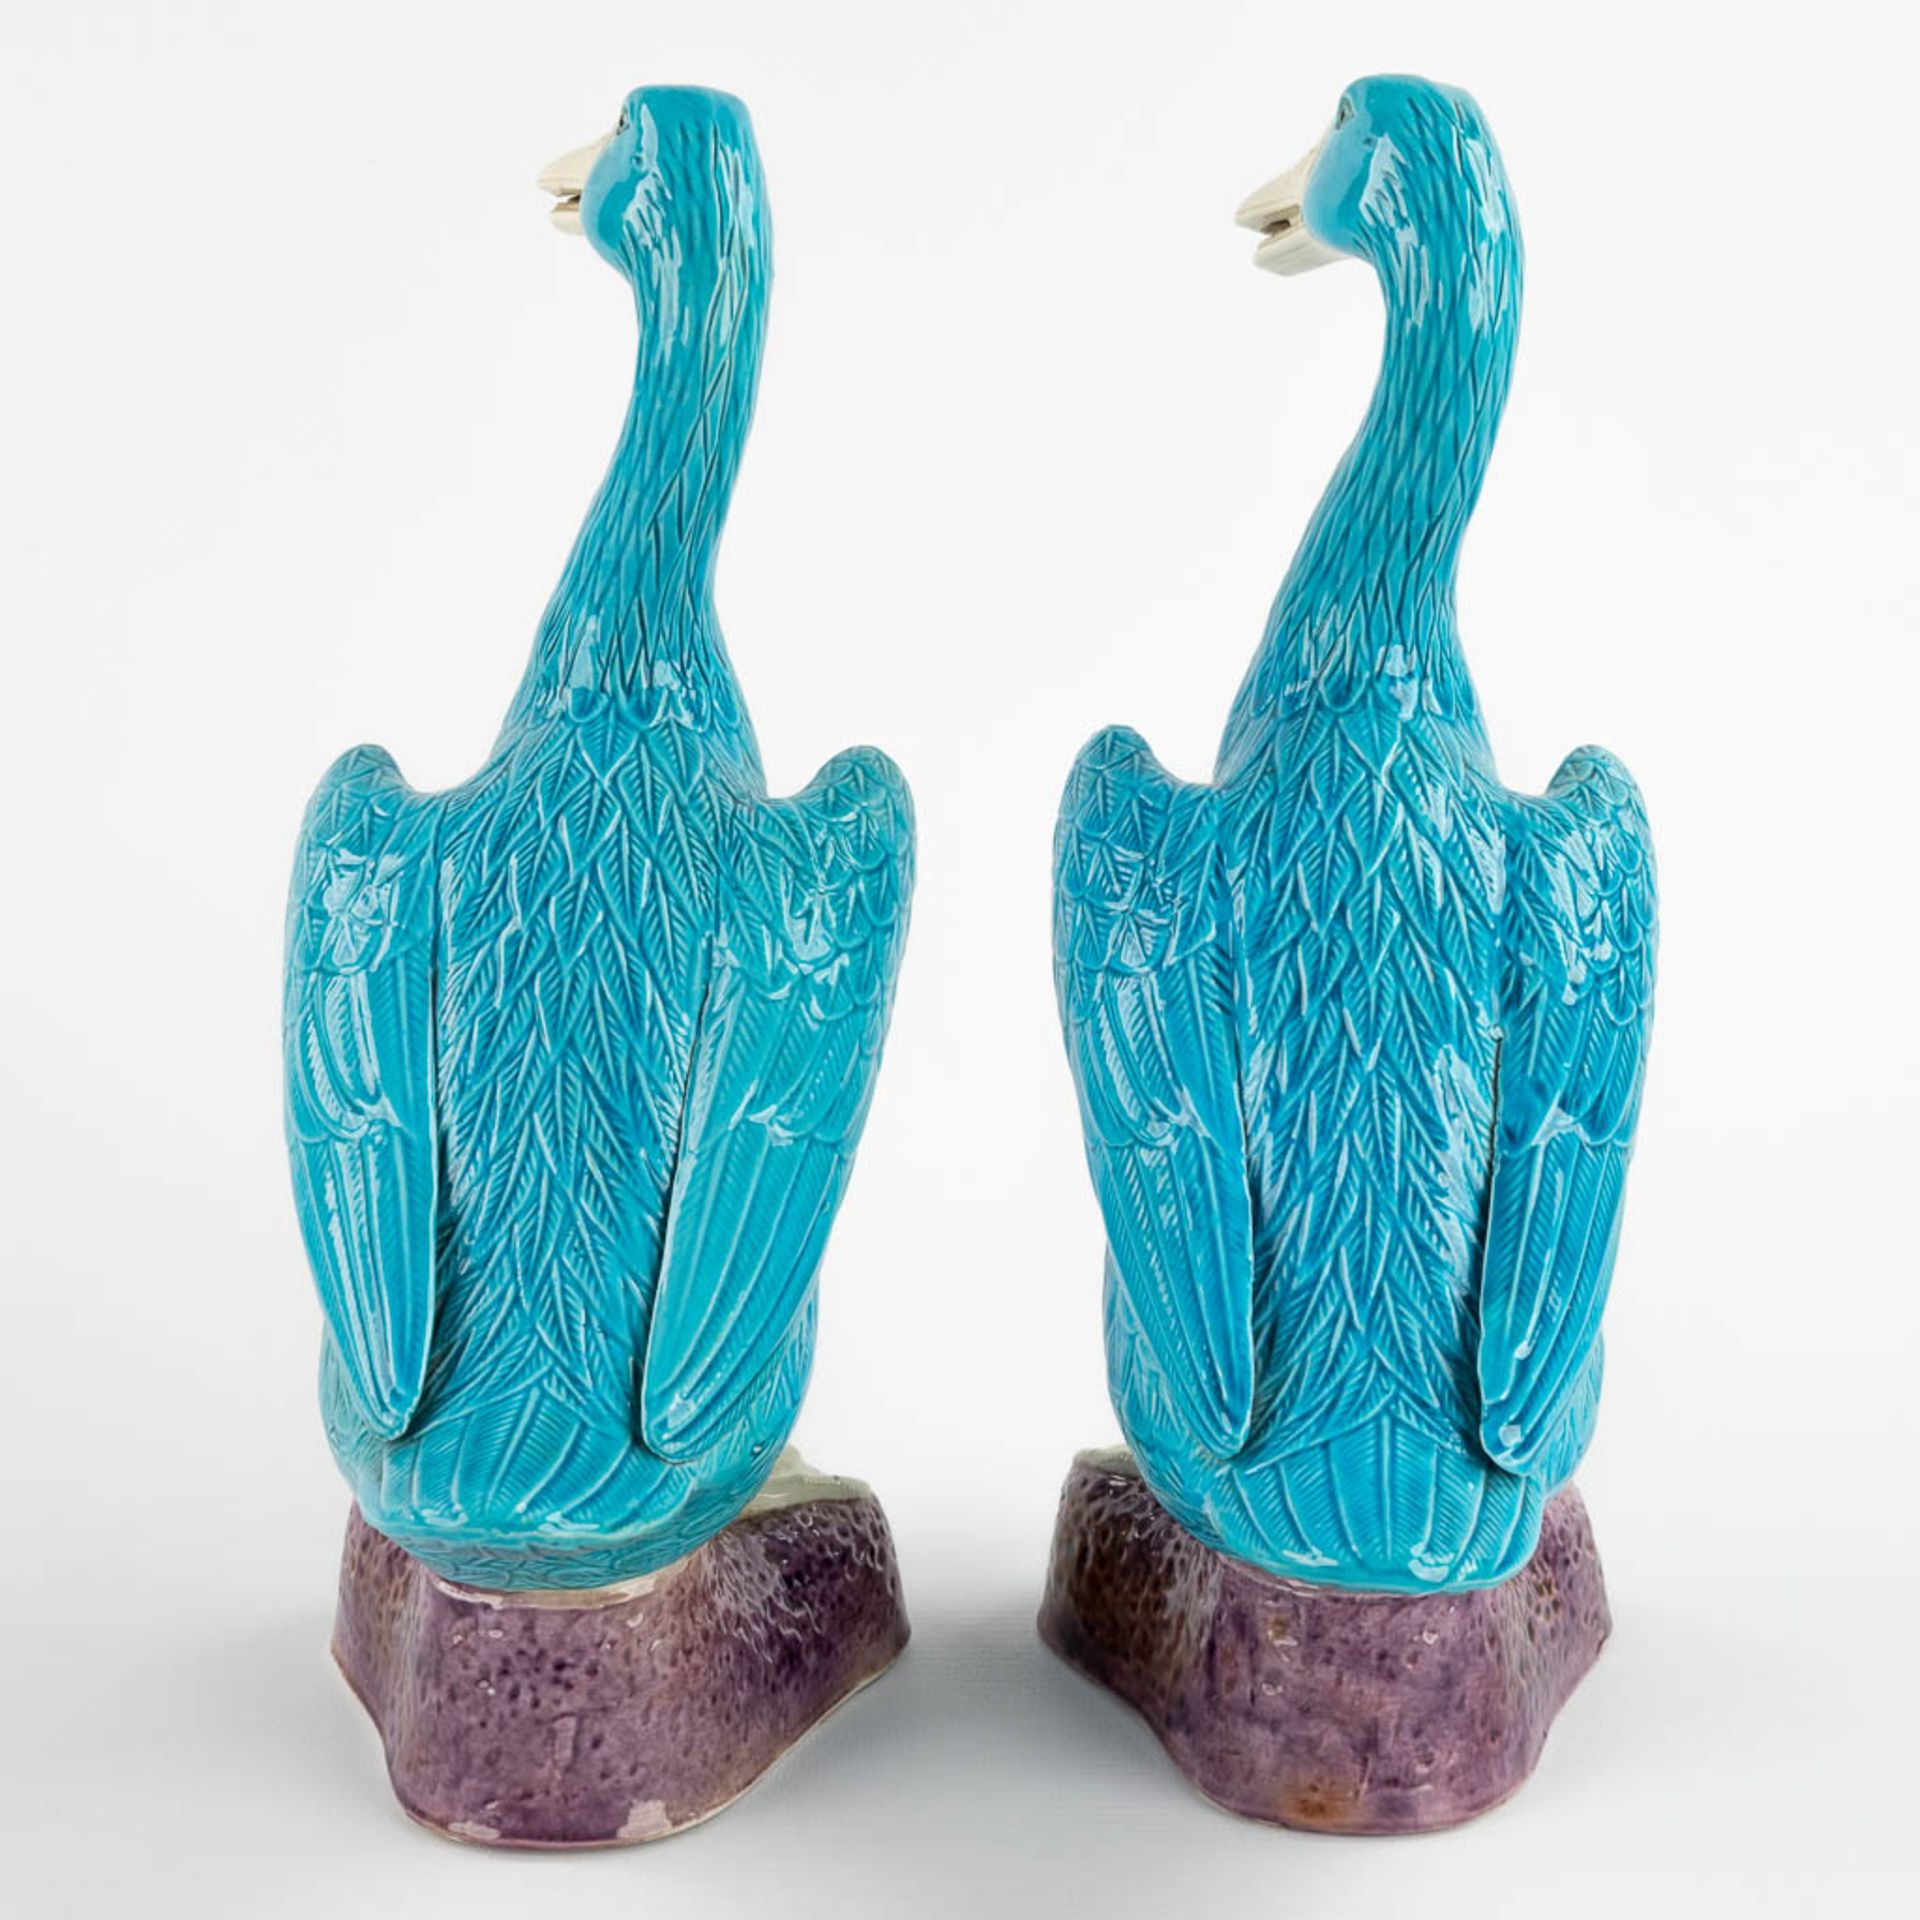 A pair of Temple guards and a pair of geese, glazed stoneware. 20th C. (D:15 x W:21 x H:44 cm) - Image 12 of 16